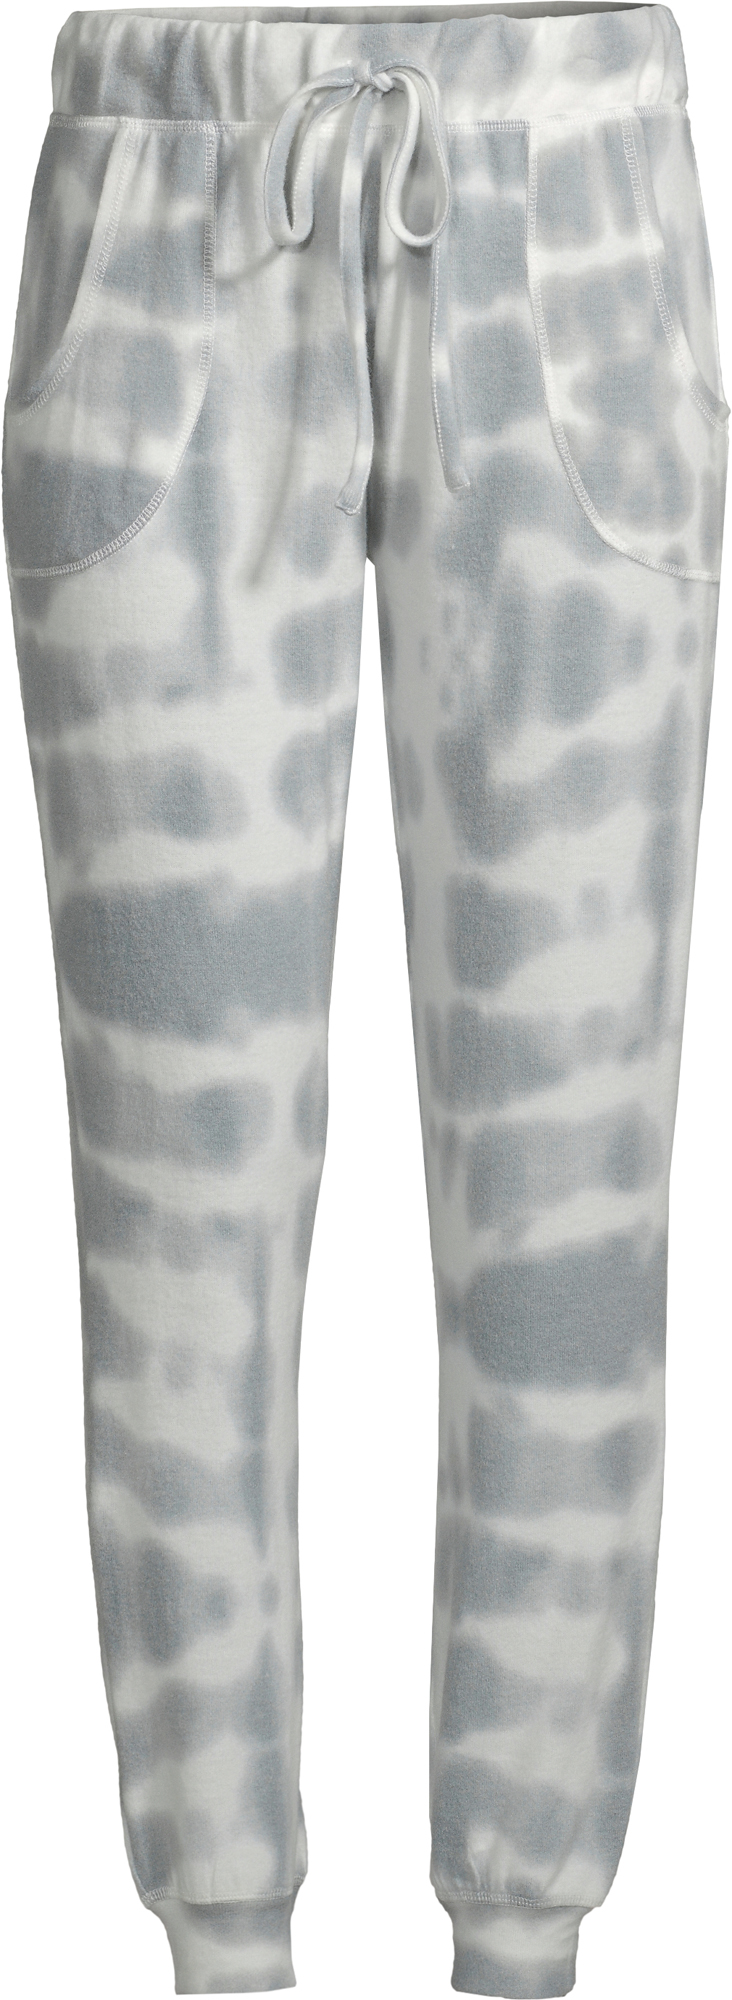 Como Blu Women's Athleisure Tie Dye Hacci Joggers with Pockets - image 2 of 6